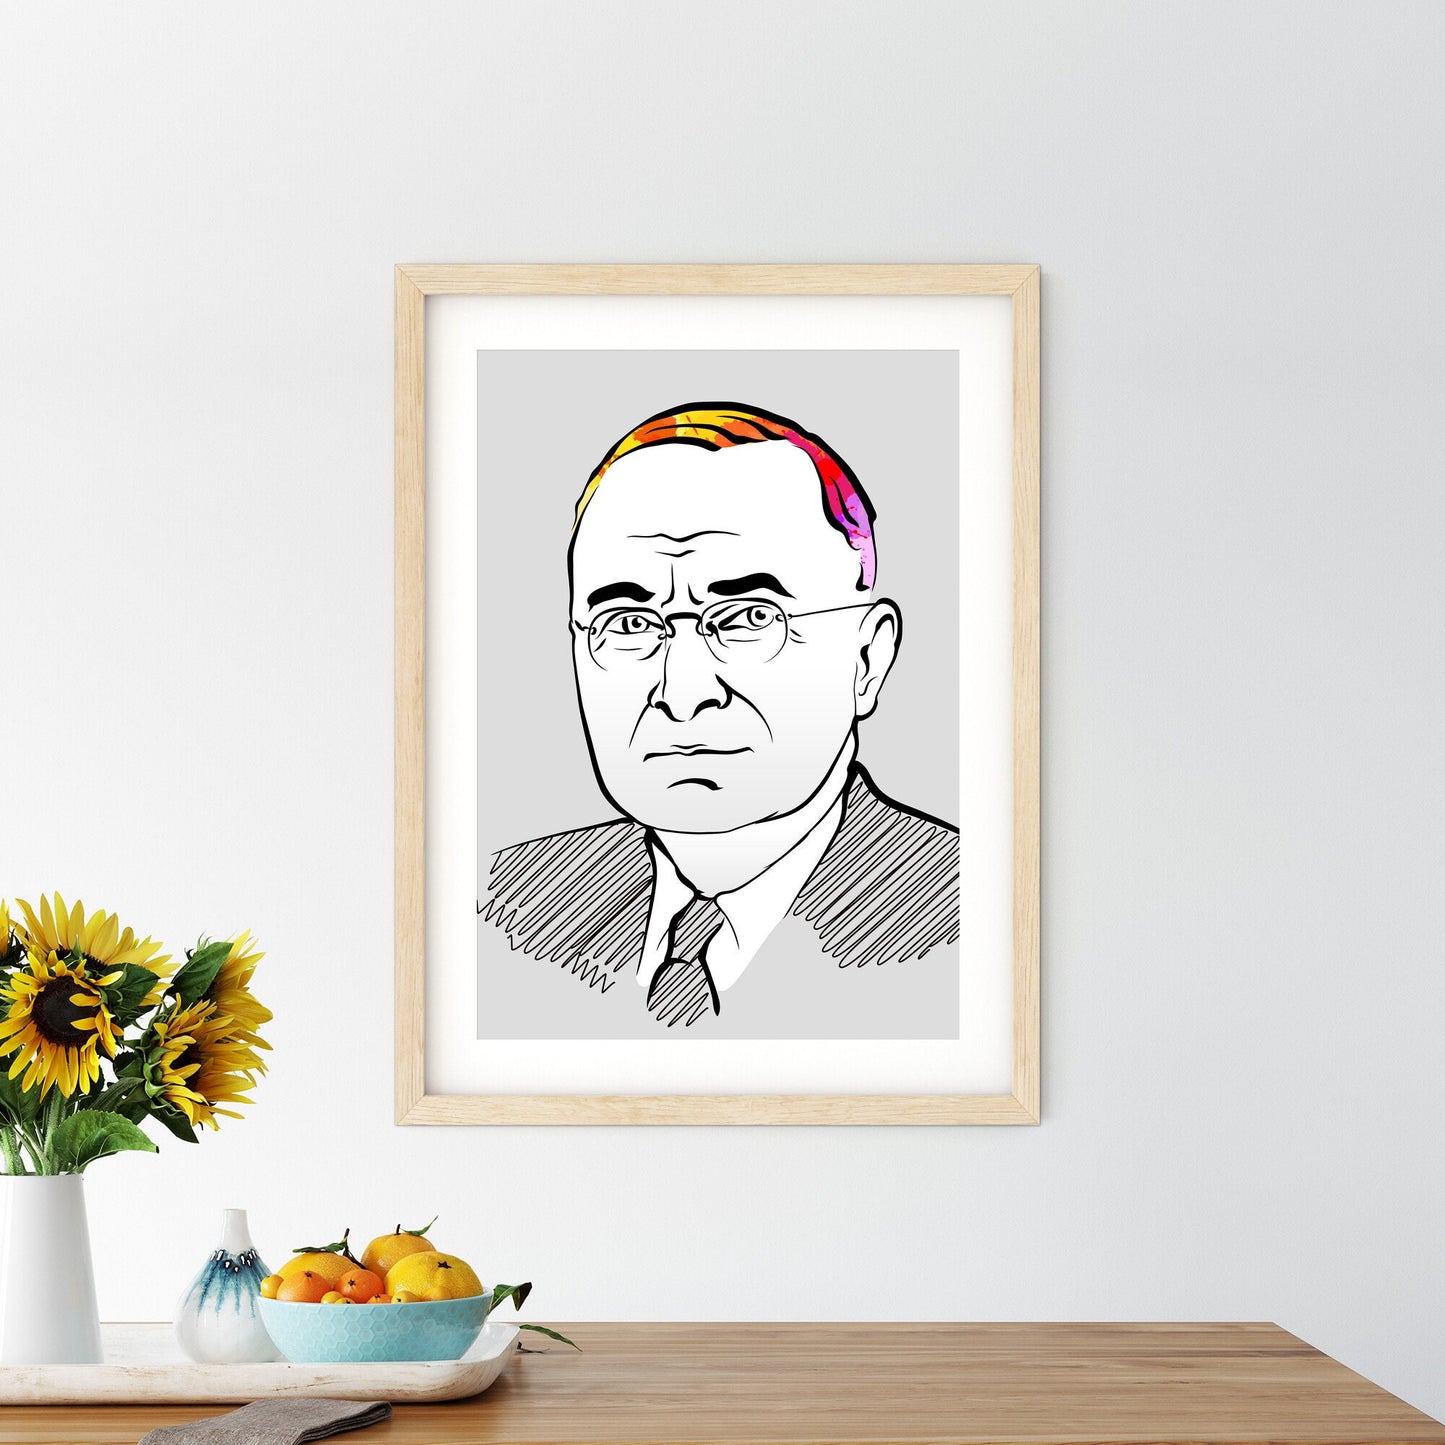 Harry S. Truman Portrait Poster With Colorful Hair. Perfect print for patriots.